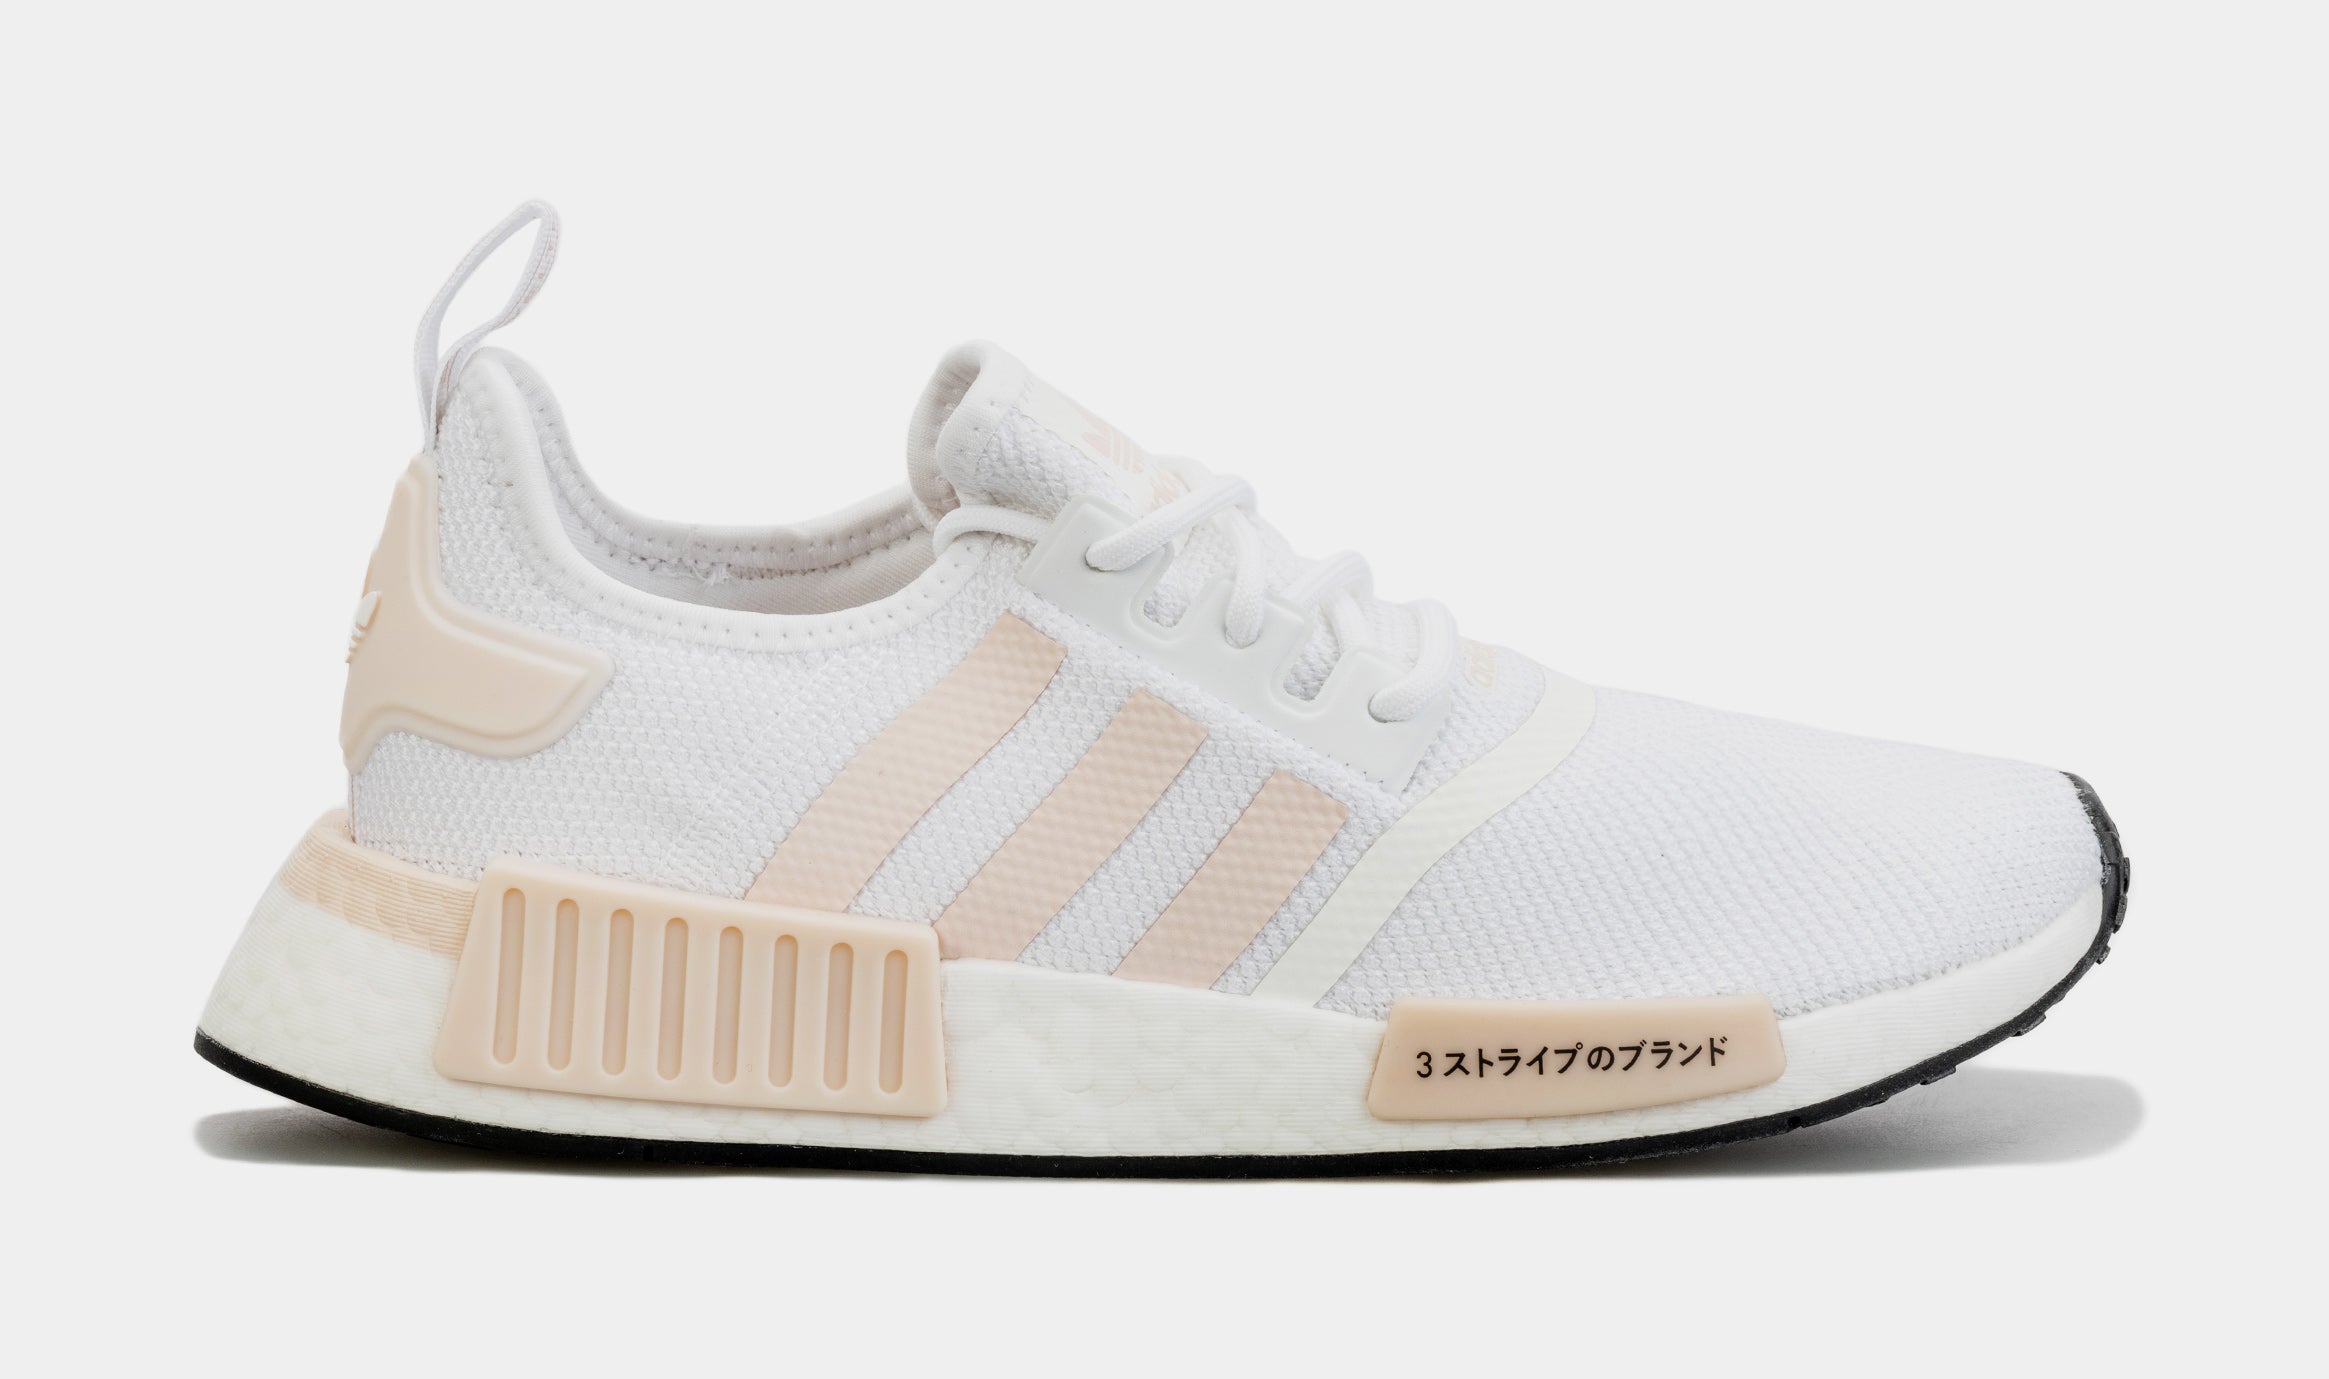 Kontinent Drik syreindhold adidas NMD R1 Womens Running Shoes White Pink IE7289 – Shoe Palace